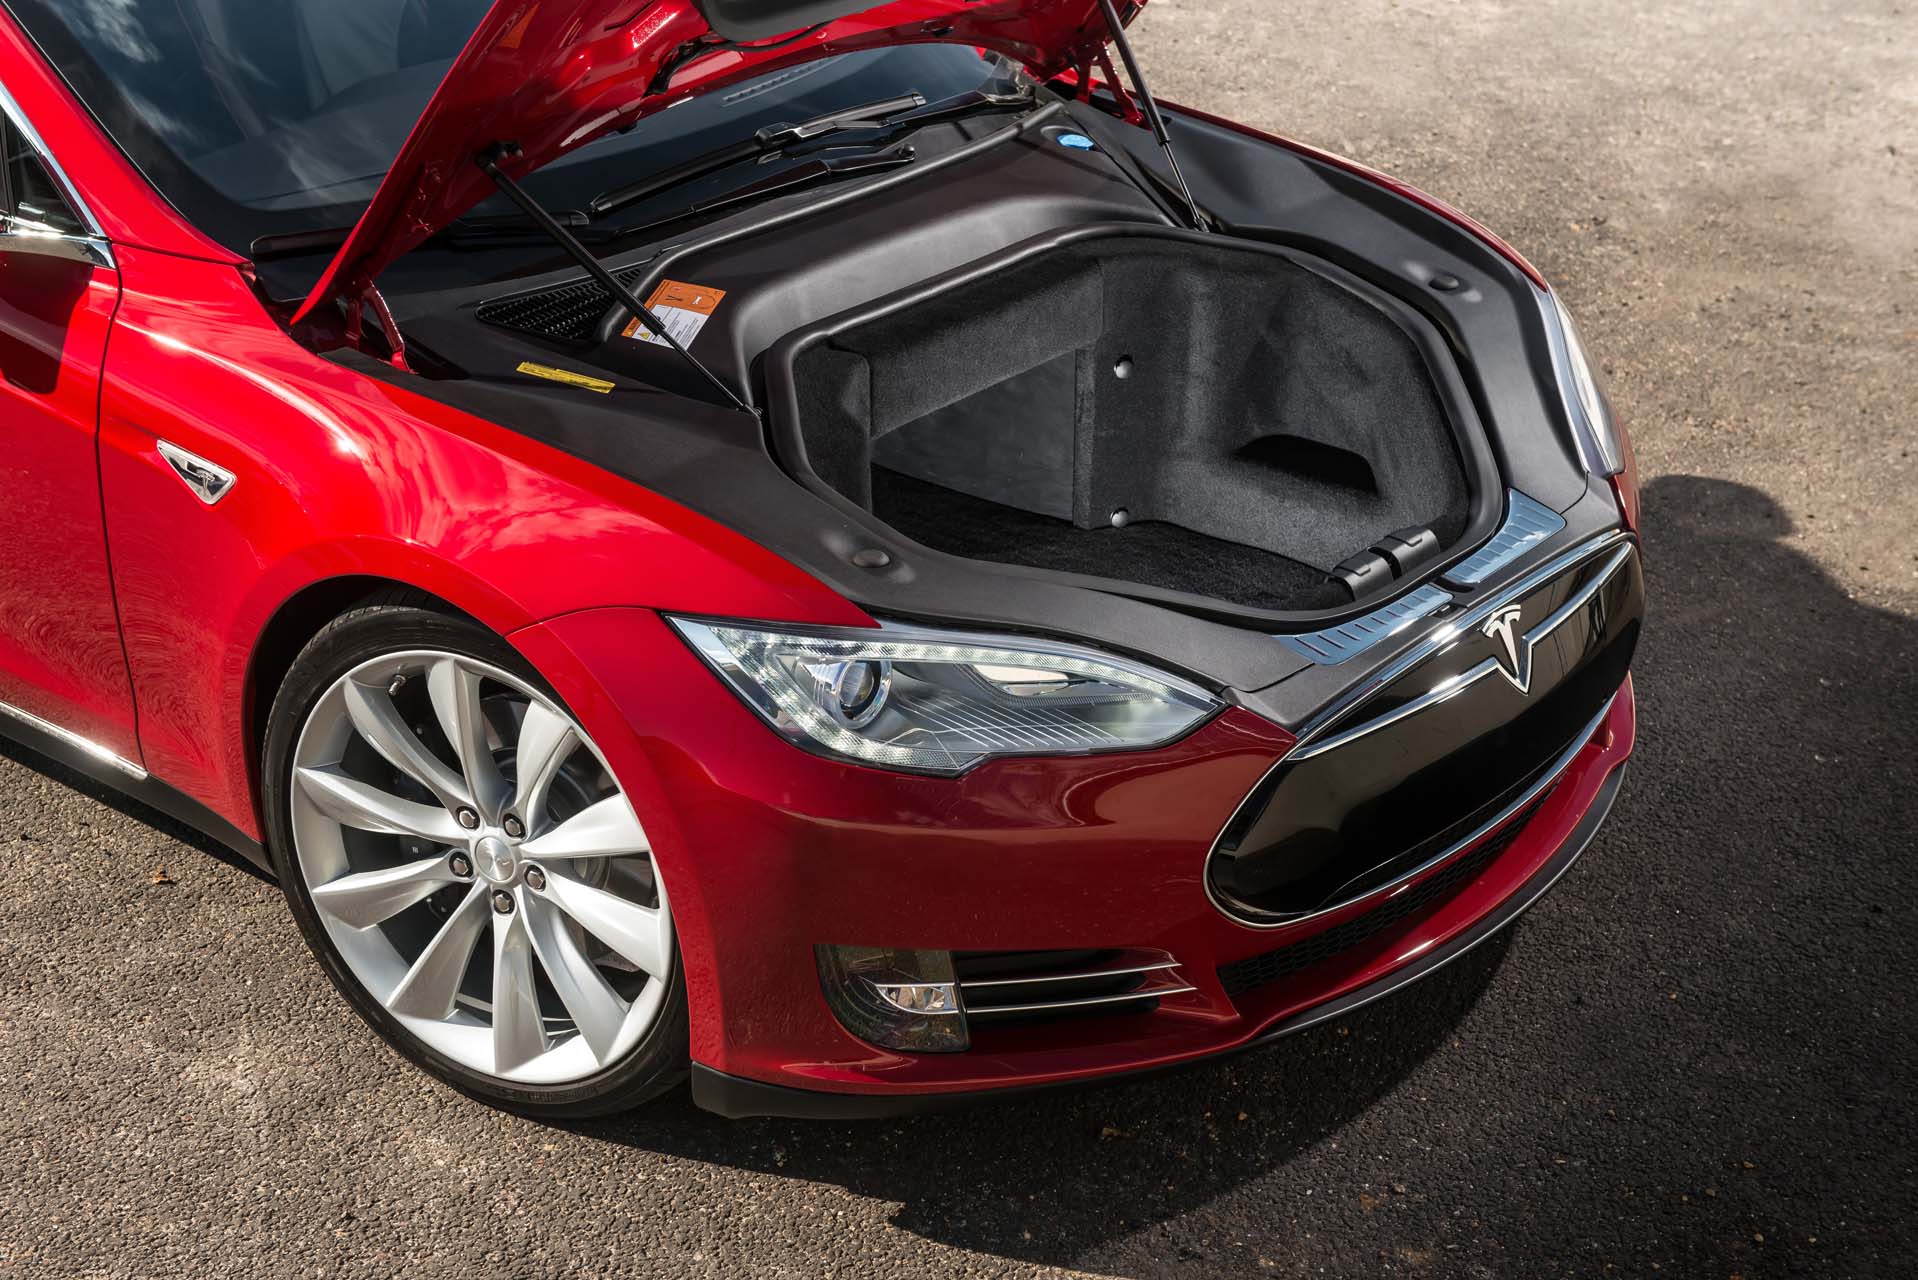 Tesla electric cars have quality issues, but owners love them regardless